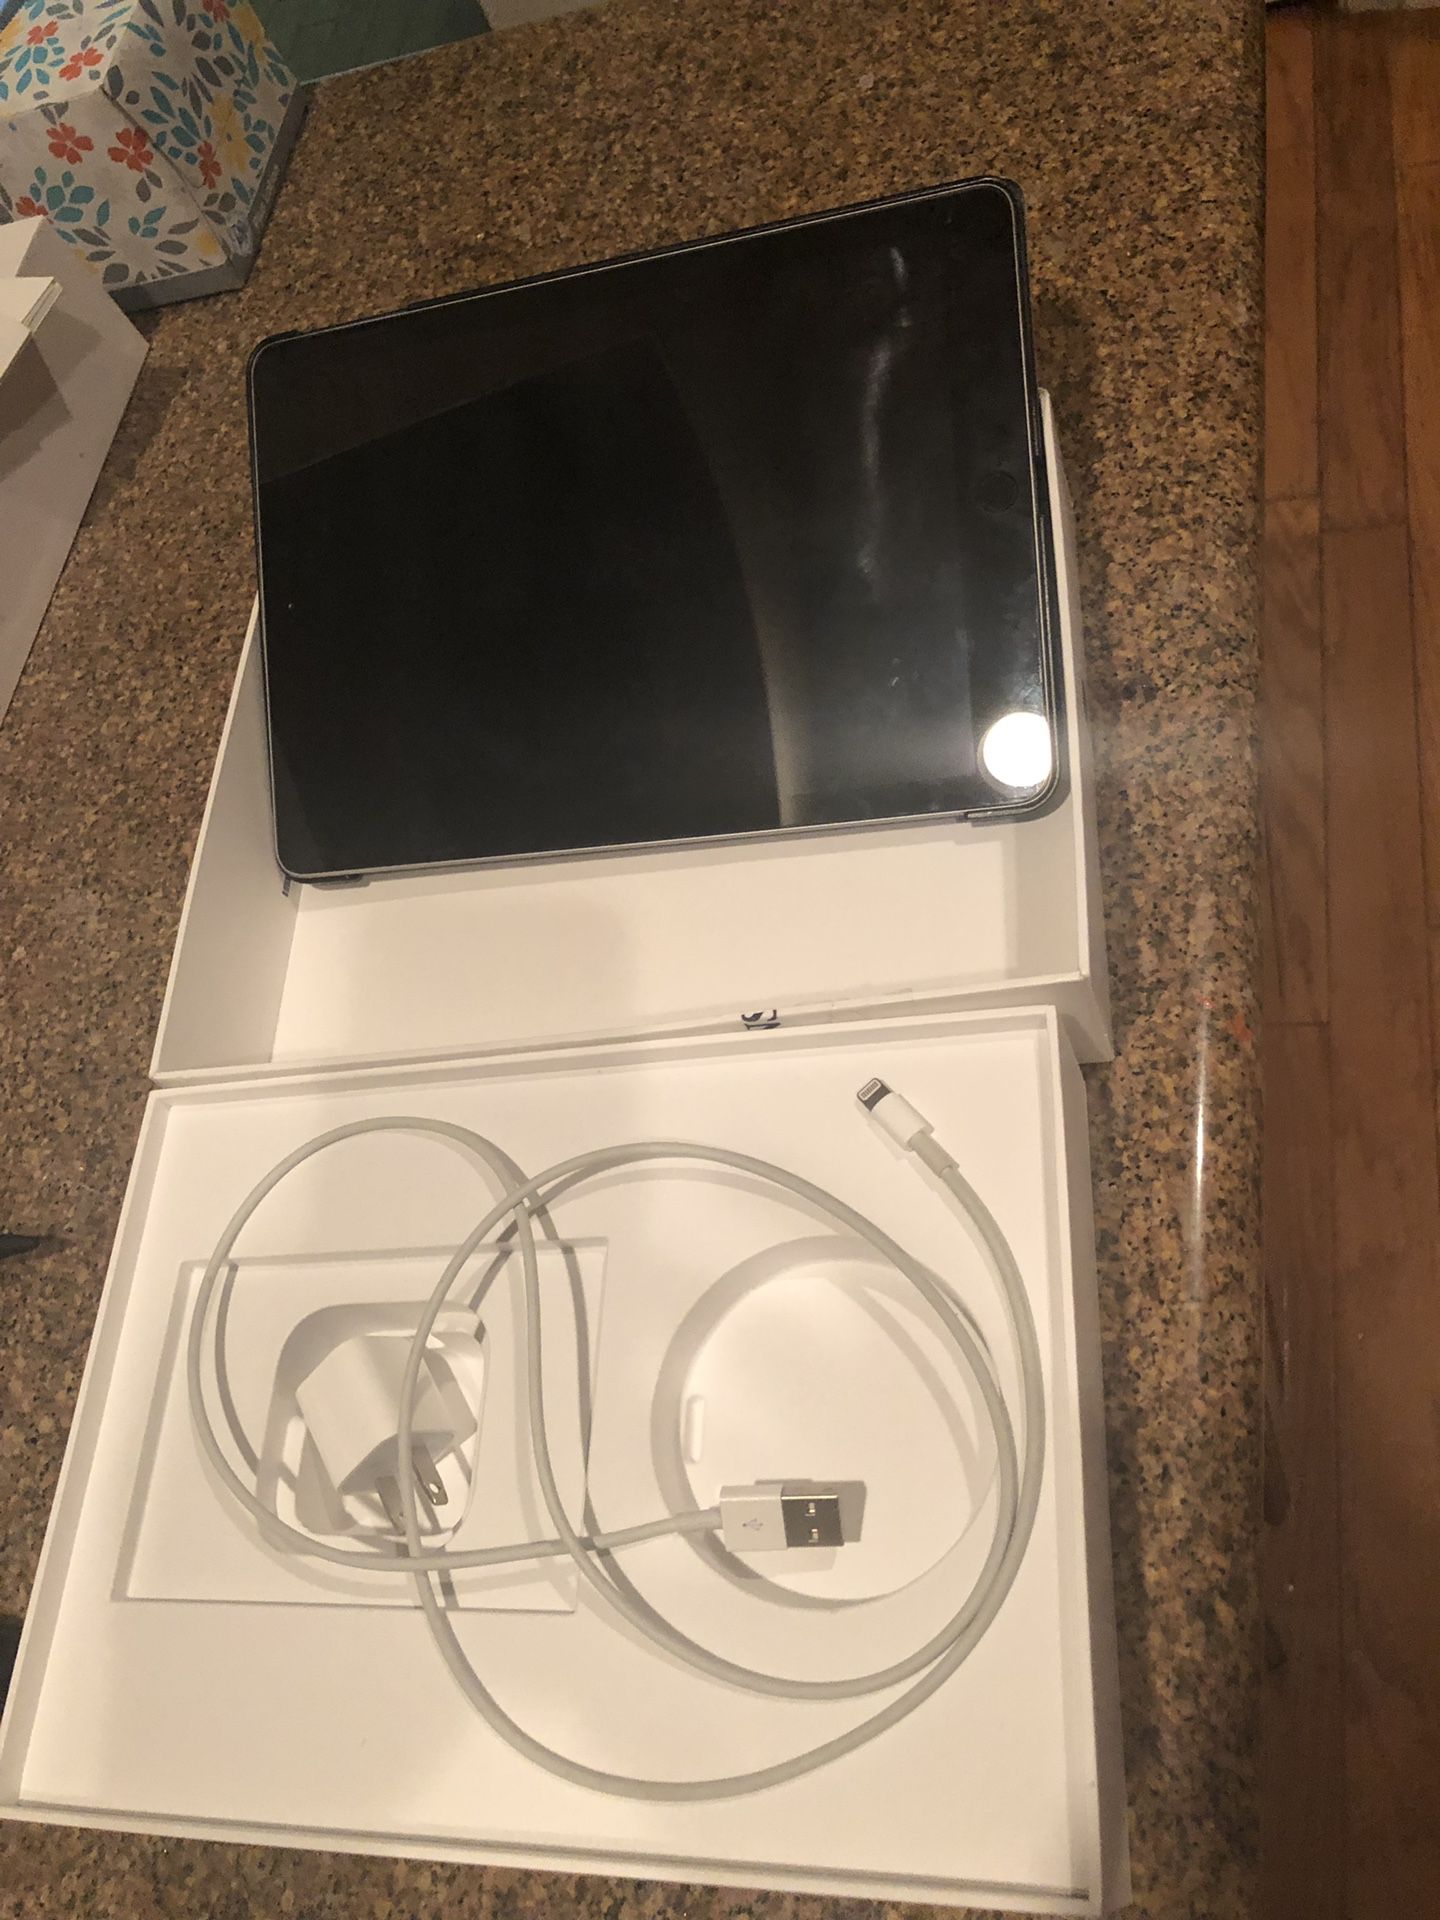 Apple I Pad 6th generation 32gb WiFi Only